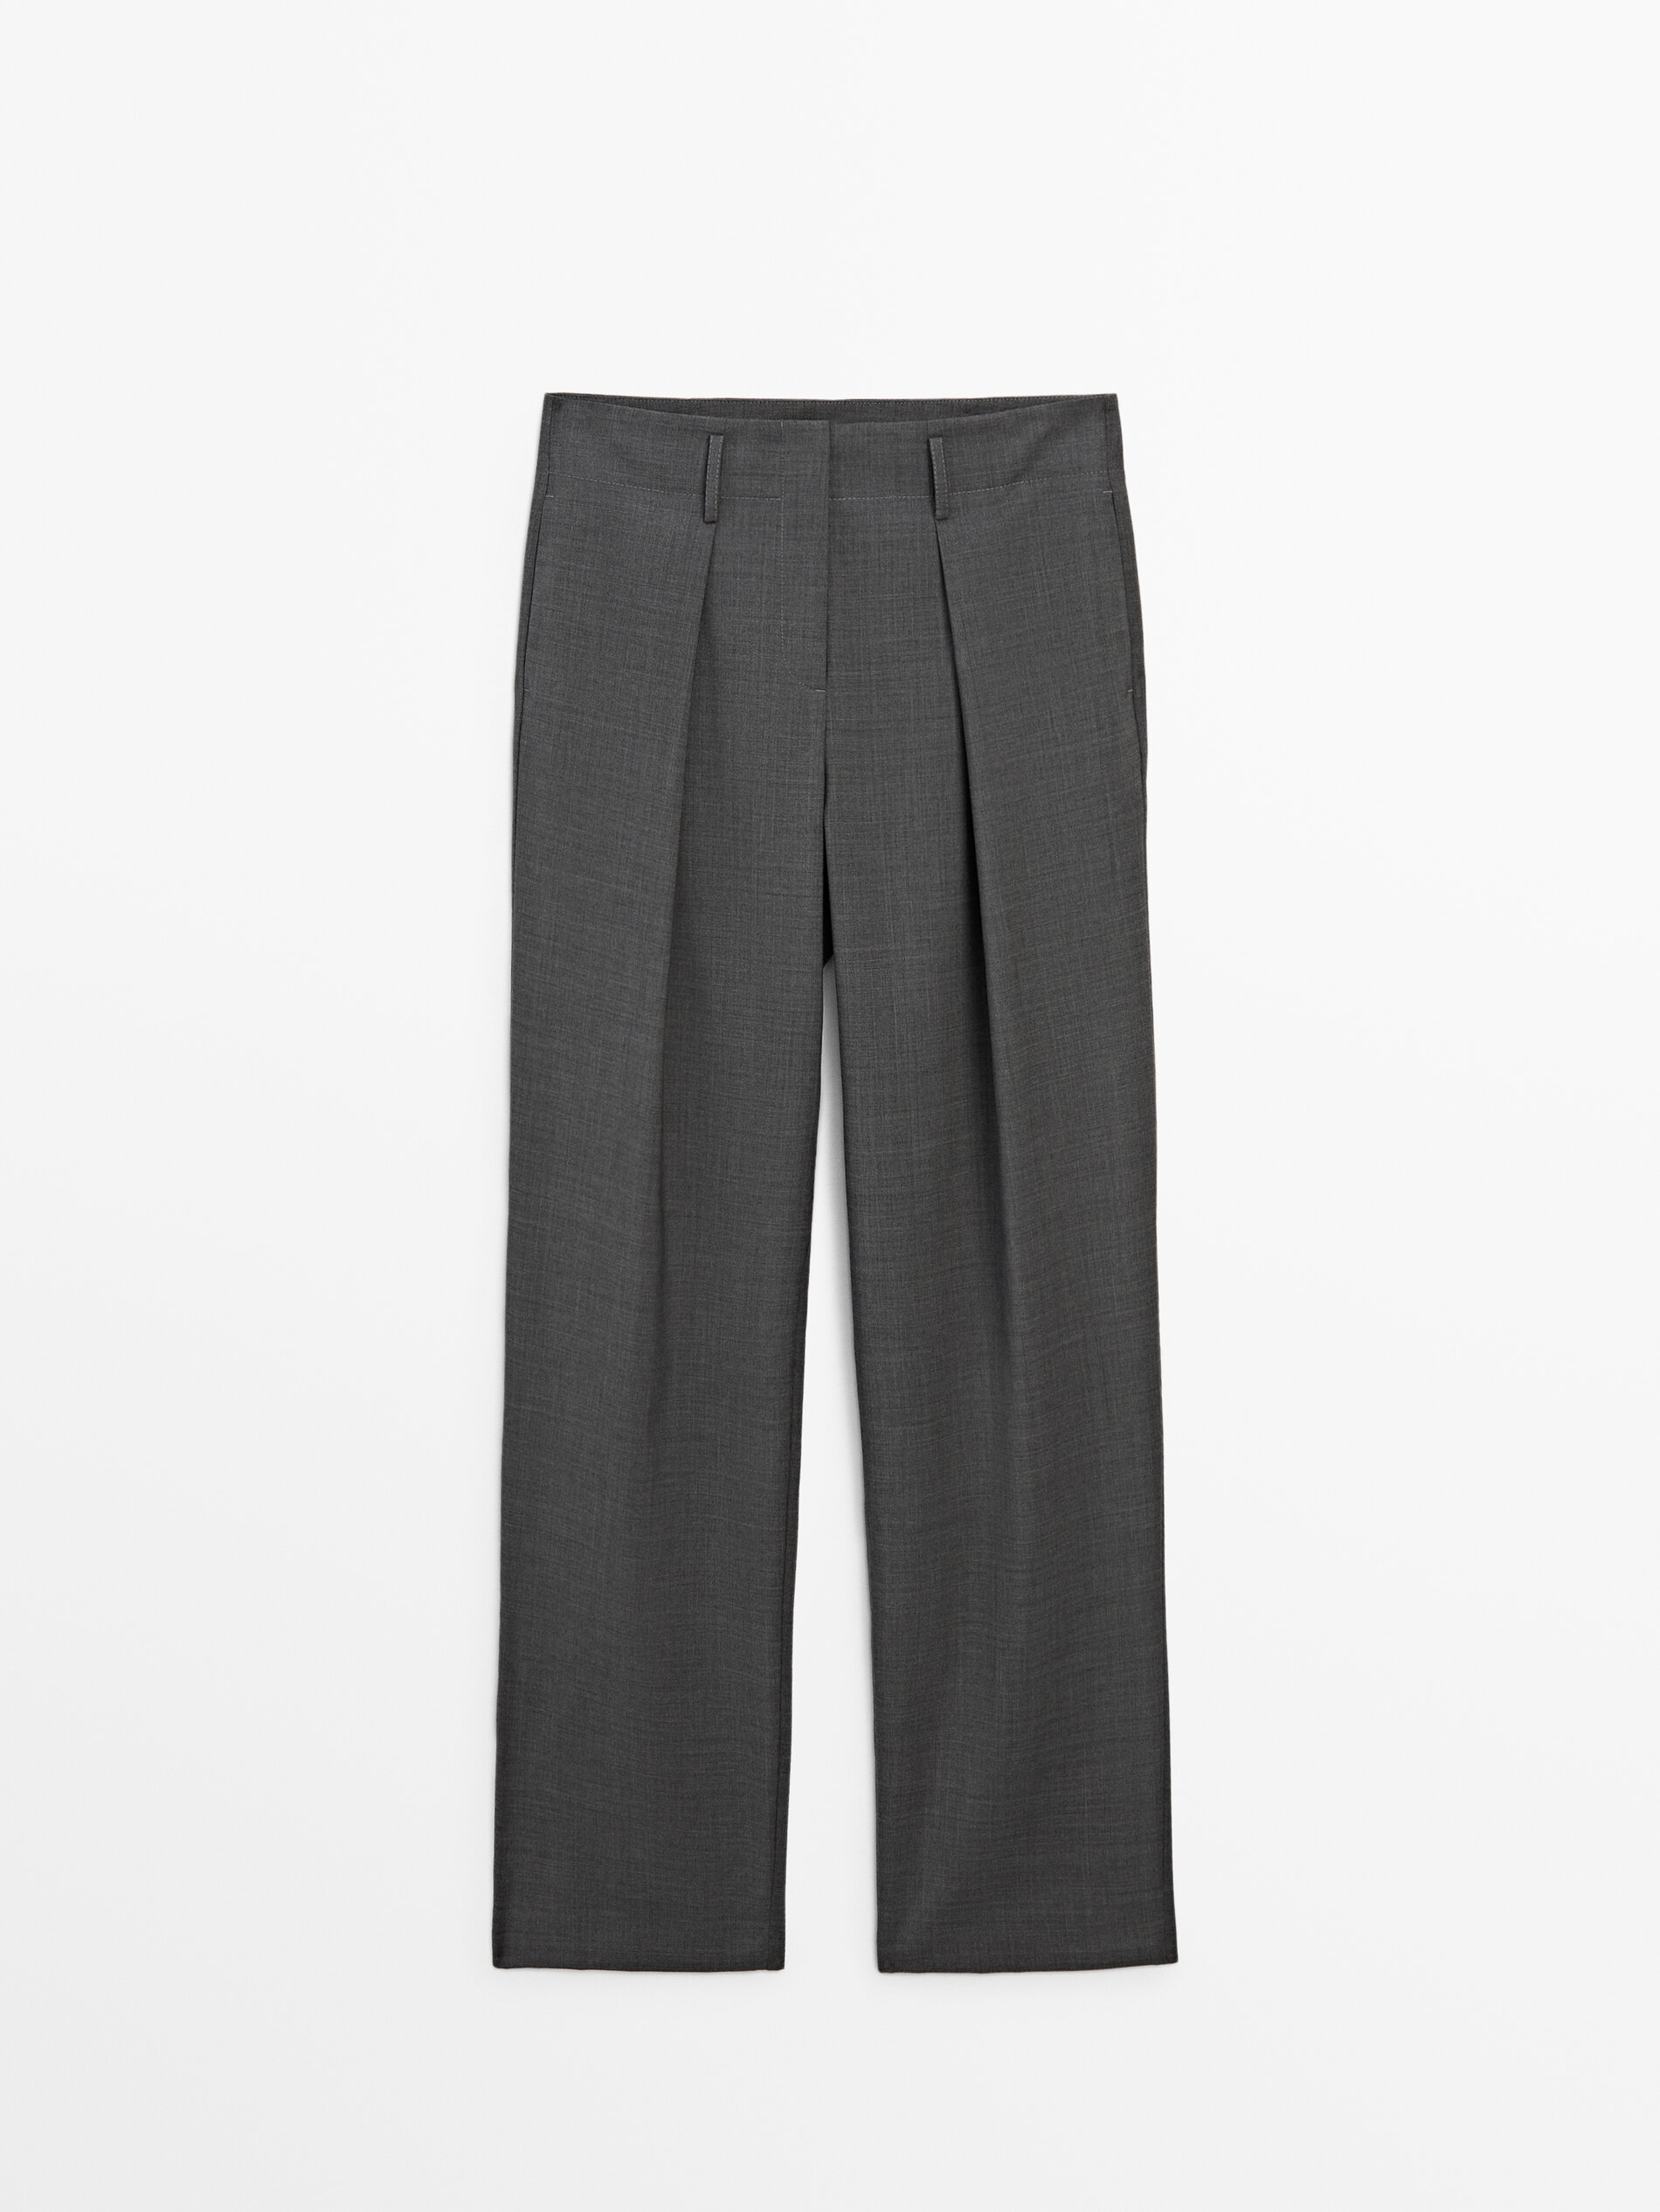 Black Normal Fit Trousers